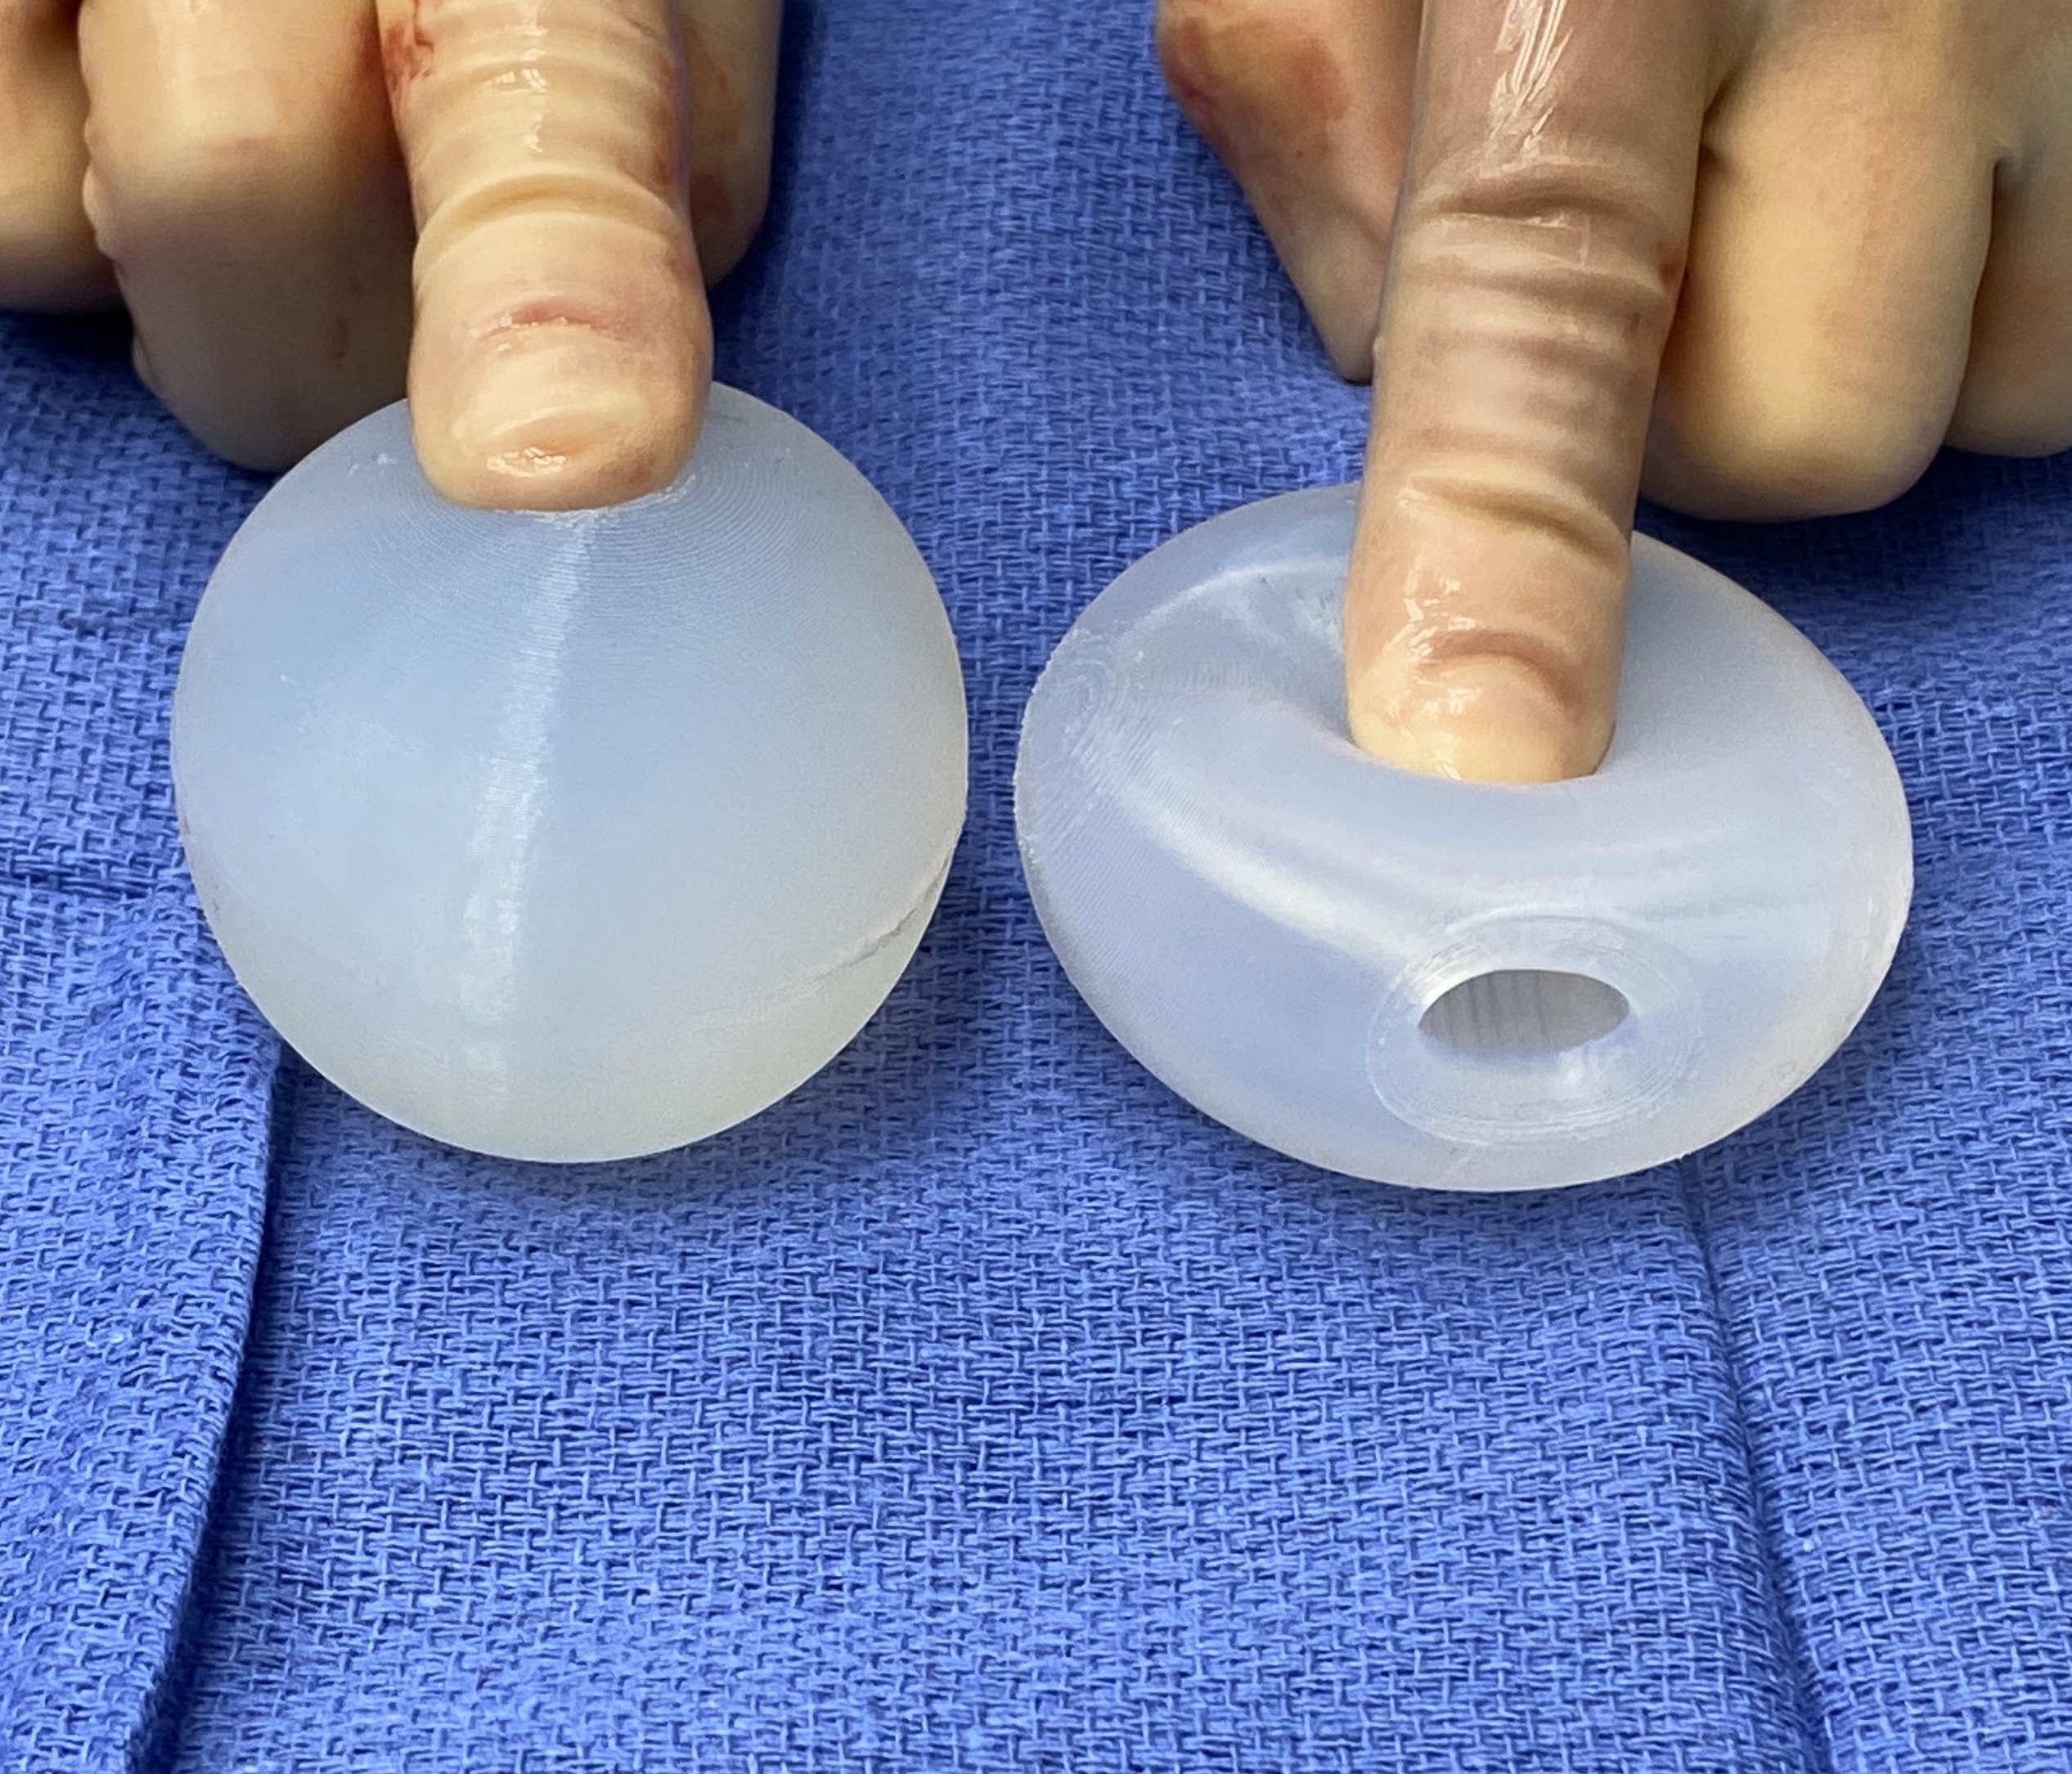 Compressibility Of Solid Vs Wraparound Testicle Implants Dr Barry Eppley Explore Plastic Surgery